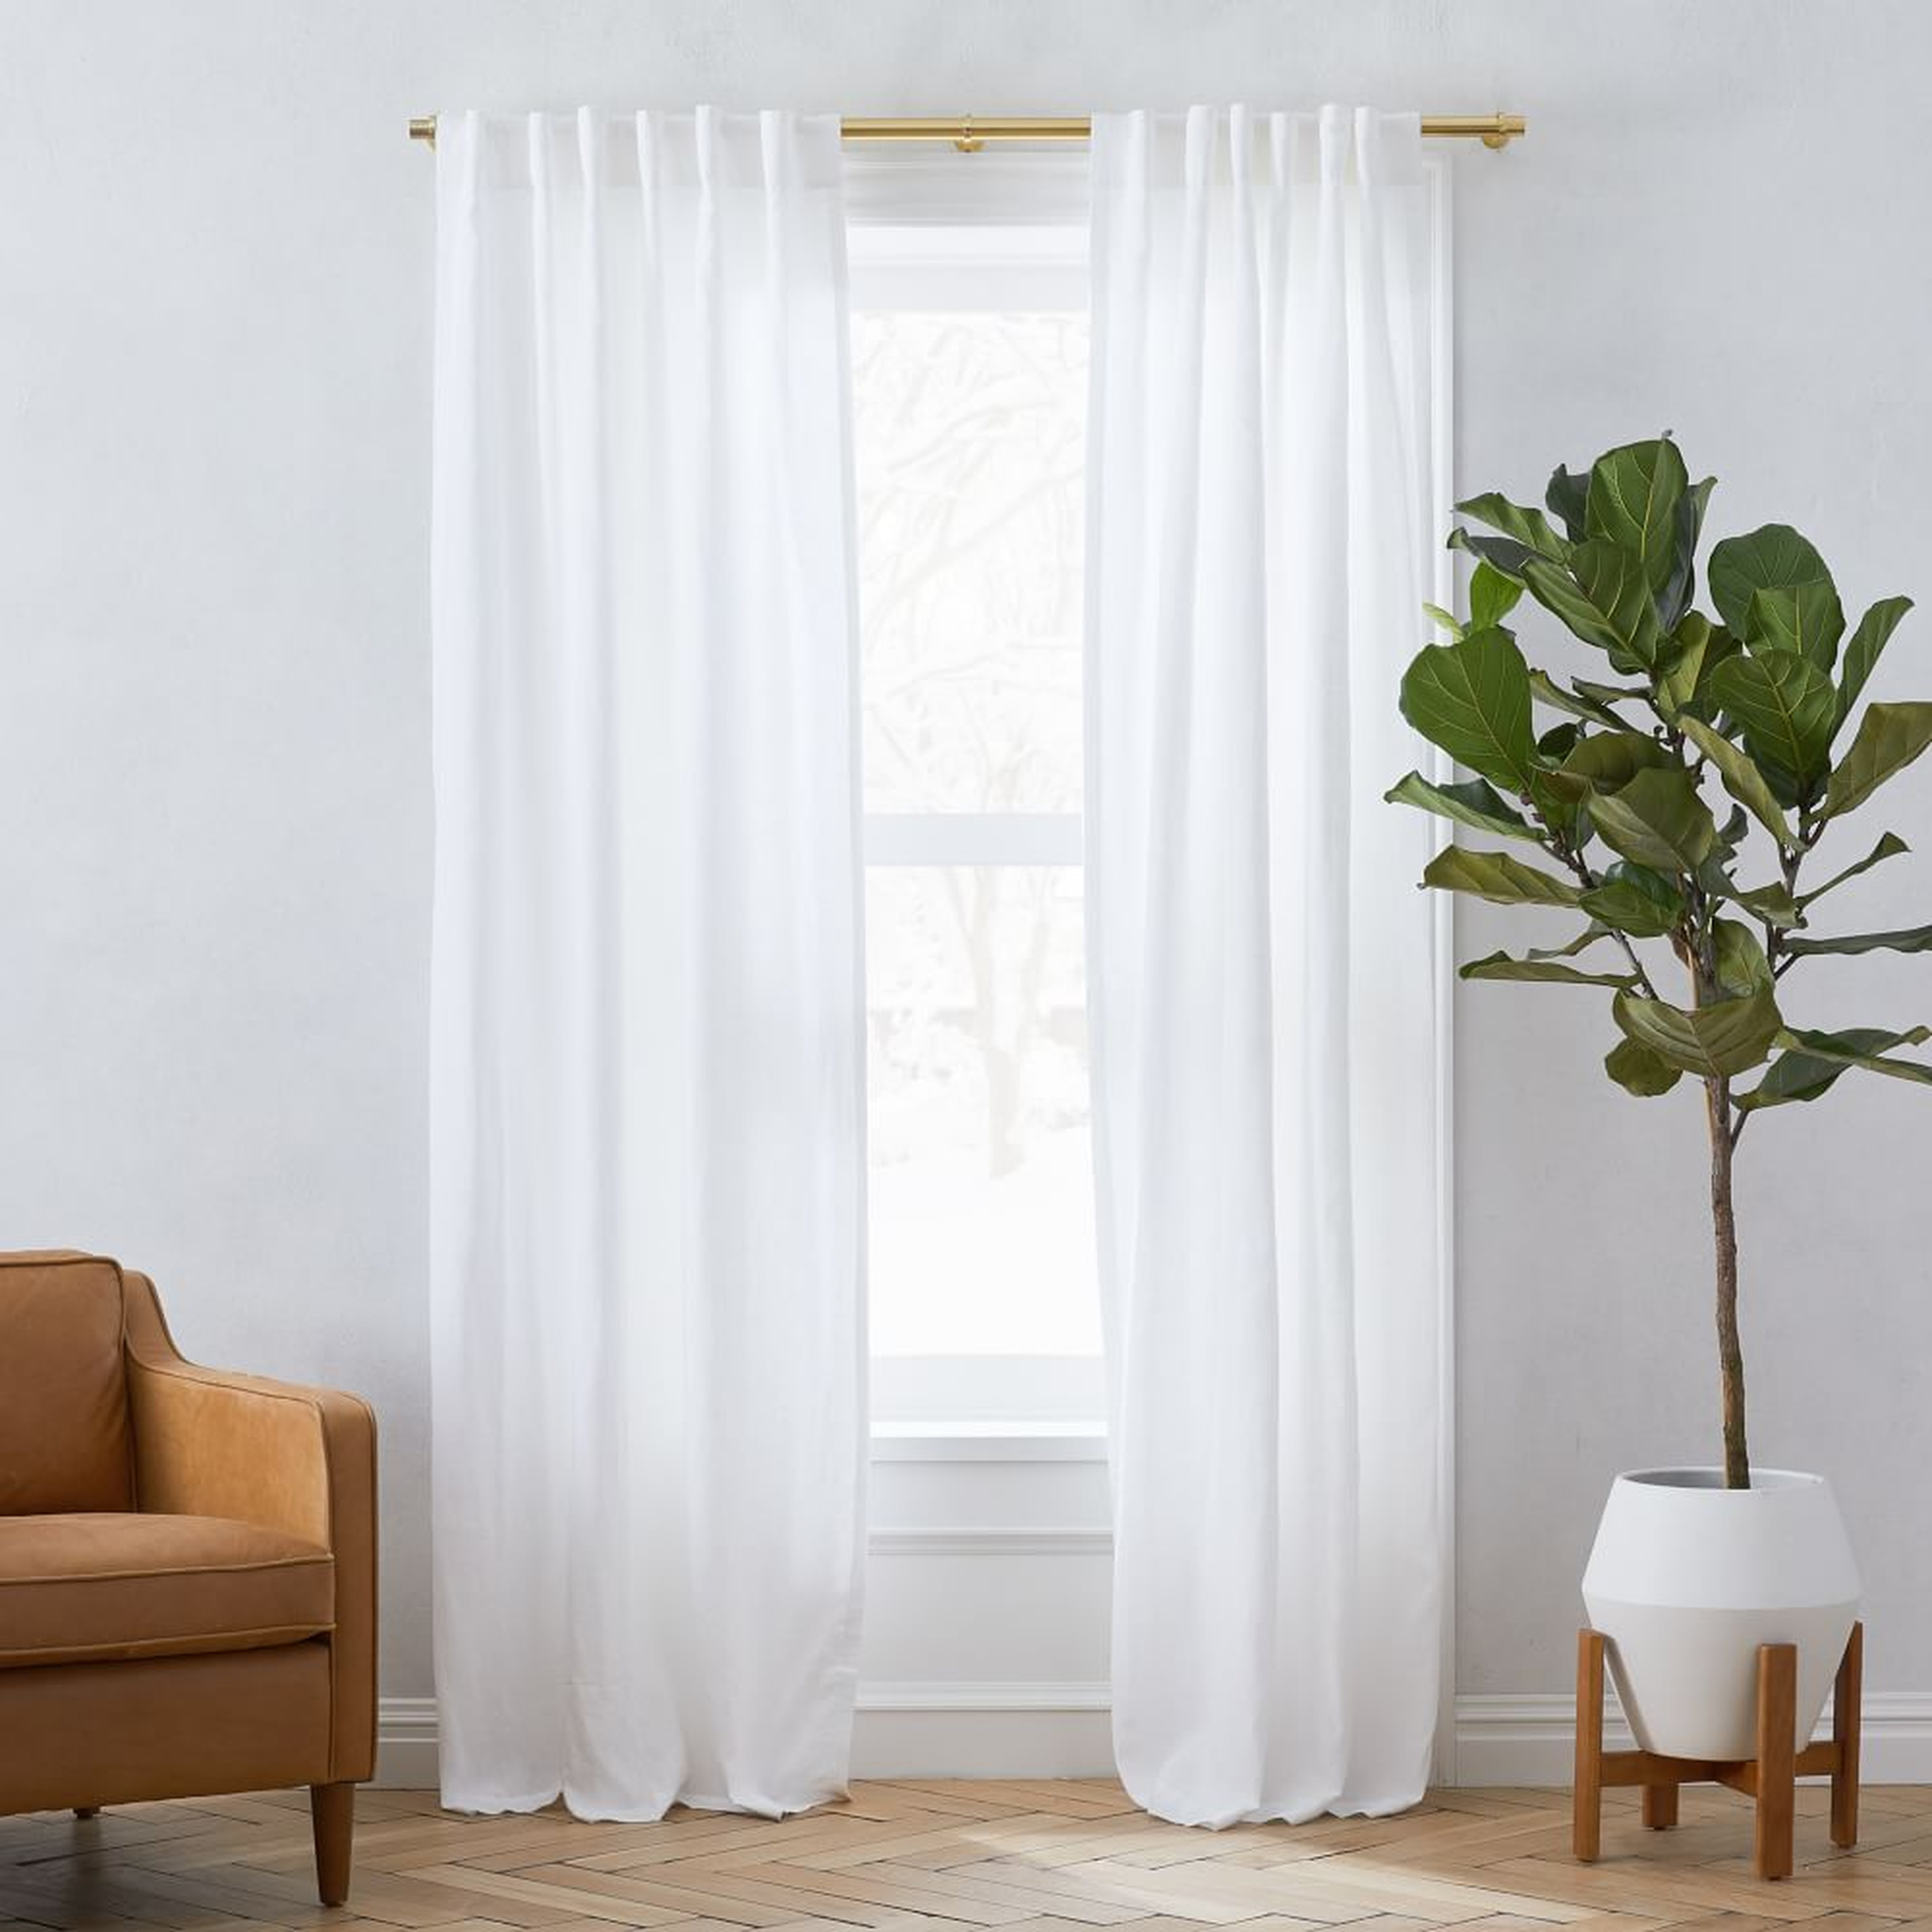 Custom Size Solid European Flax Linen Curtain with Cotton Lining, White, 54"x120" - West Elm